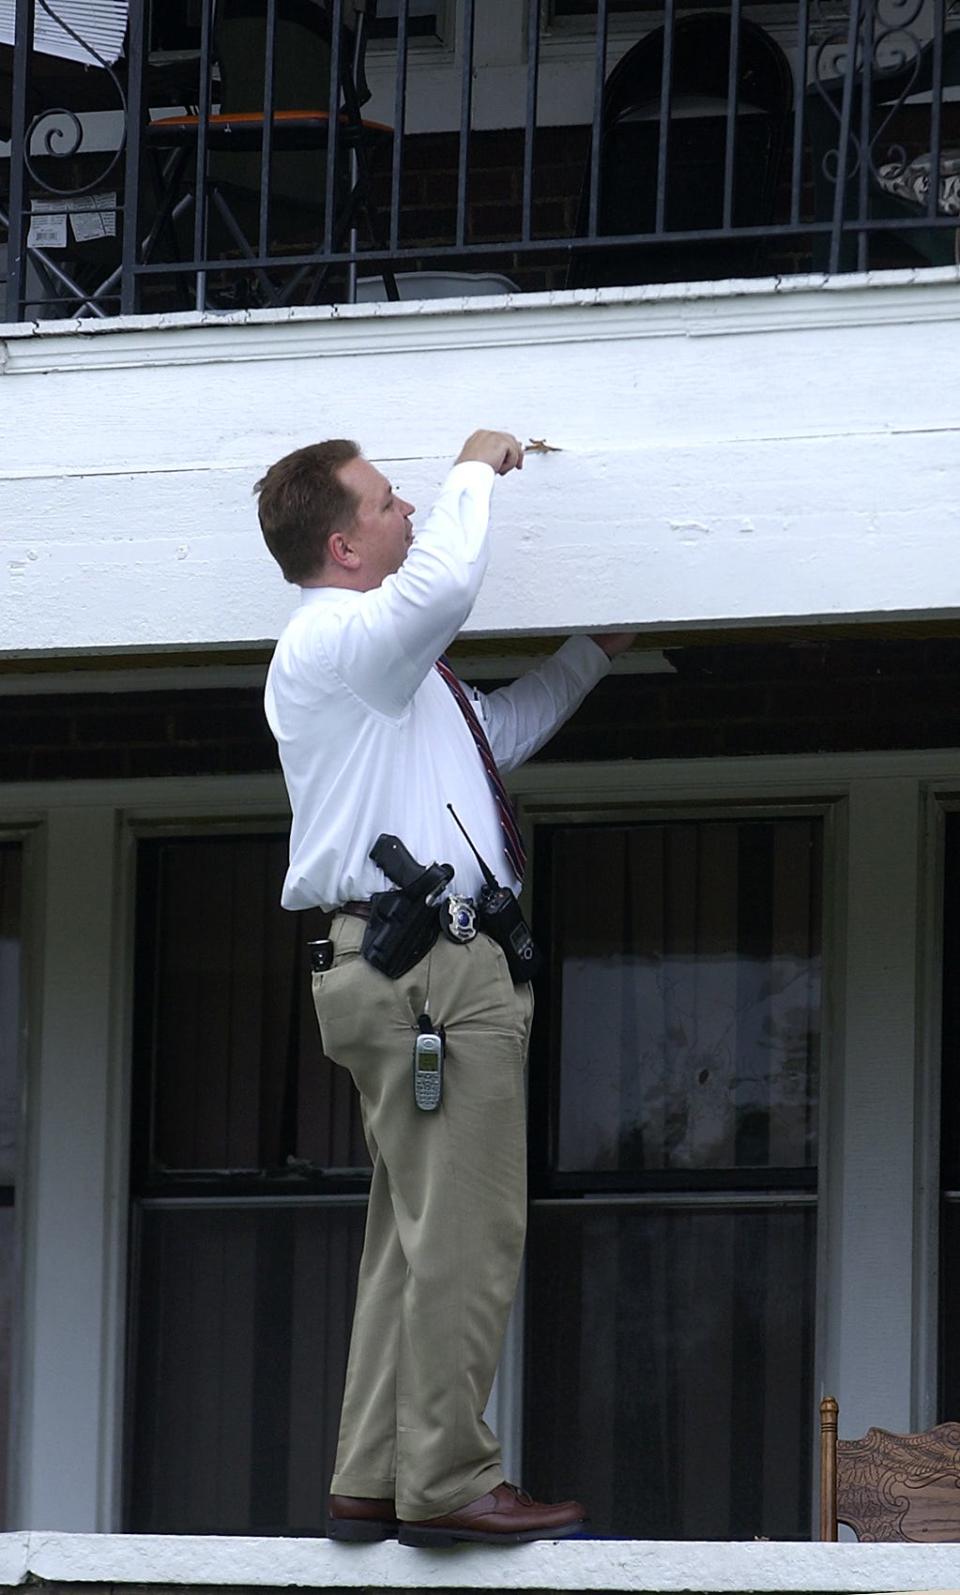 Cincinnati Police Detective John Horn checks for a bullet slug at the scene of a fatal shooting in 2005 that led to the arrest of suspect Quincy Jones. Afterward, Jones worked as a police informant for Horn and helped authorities investigate at least a dozen homicides in exchange for a plea deal.